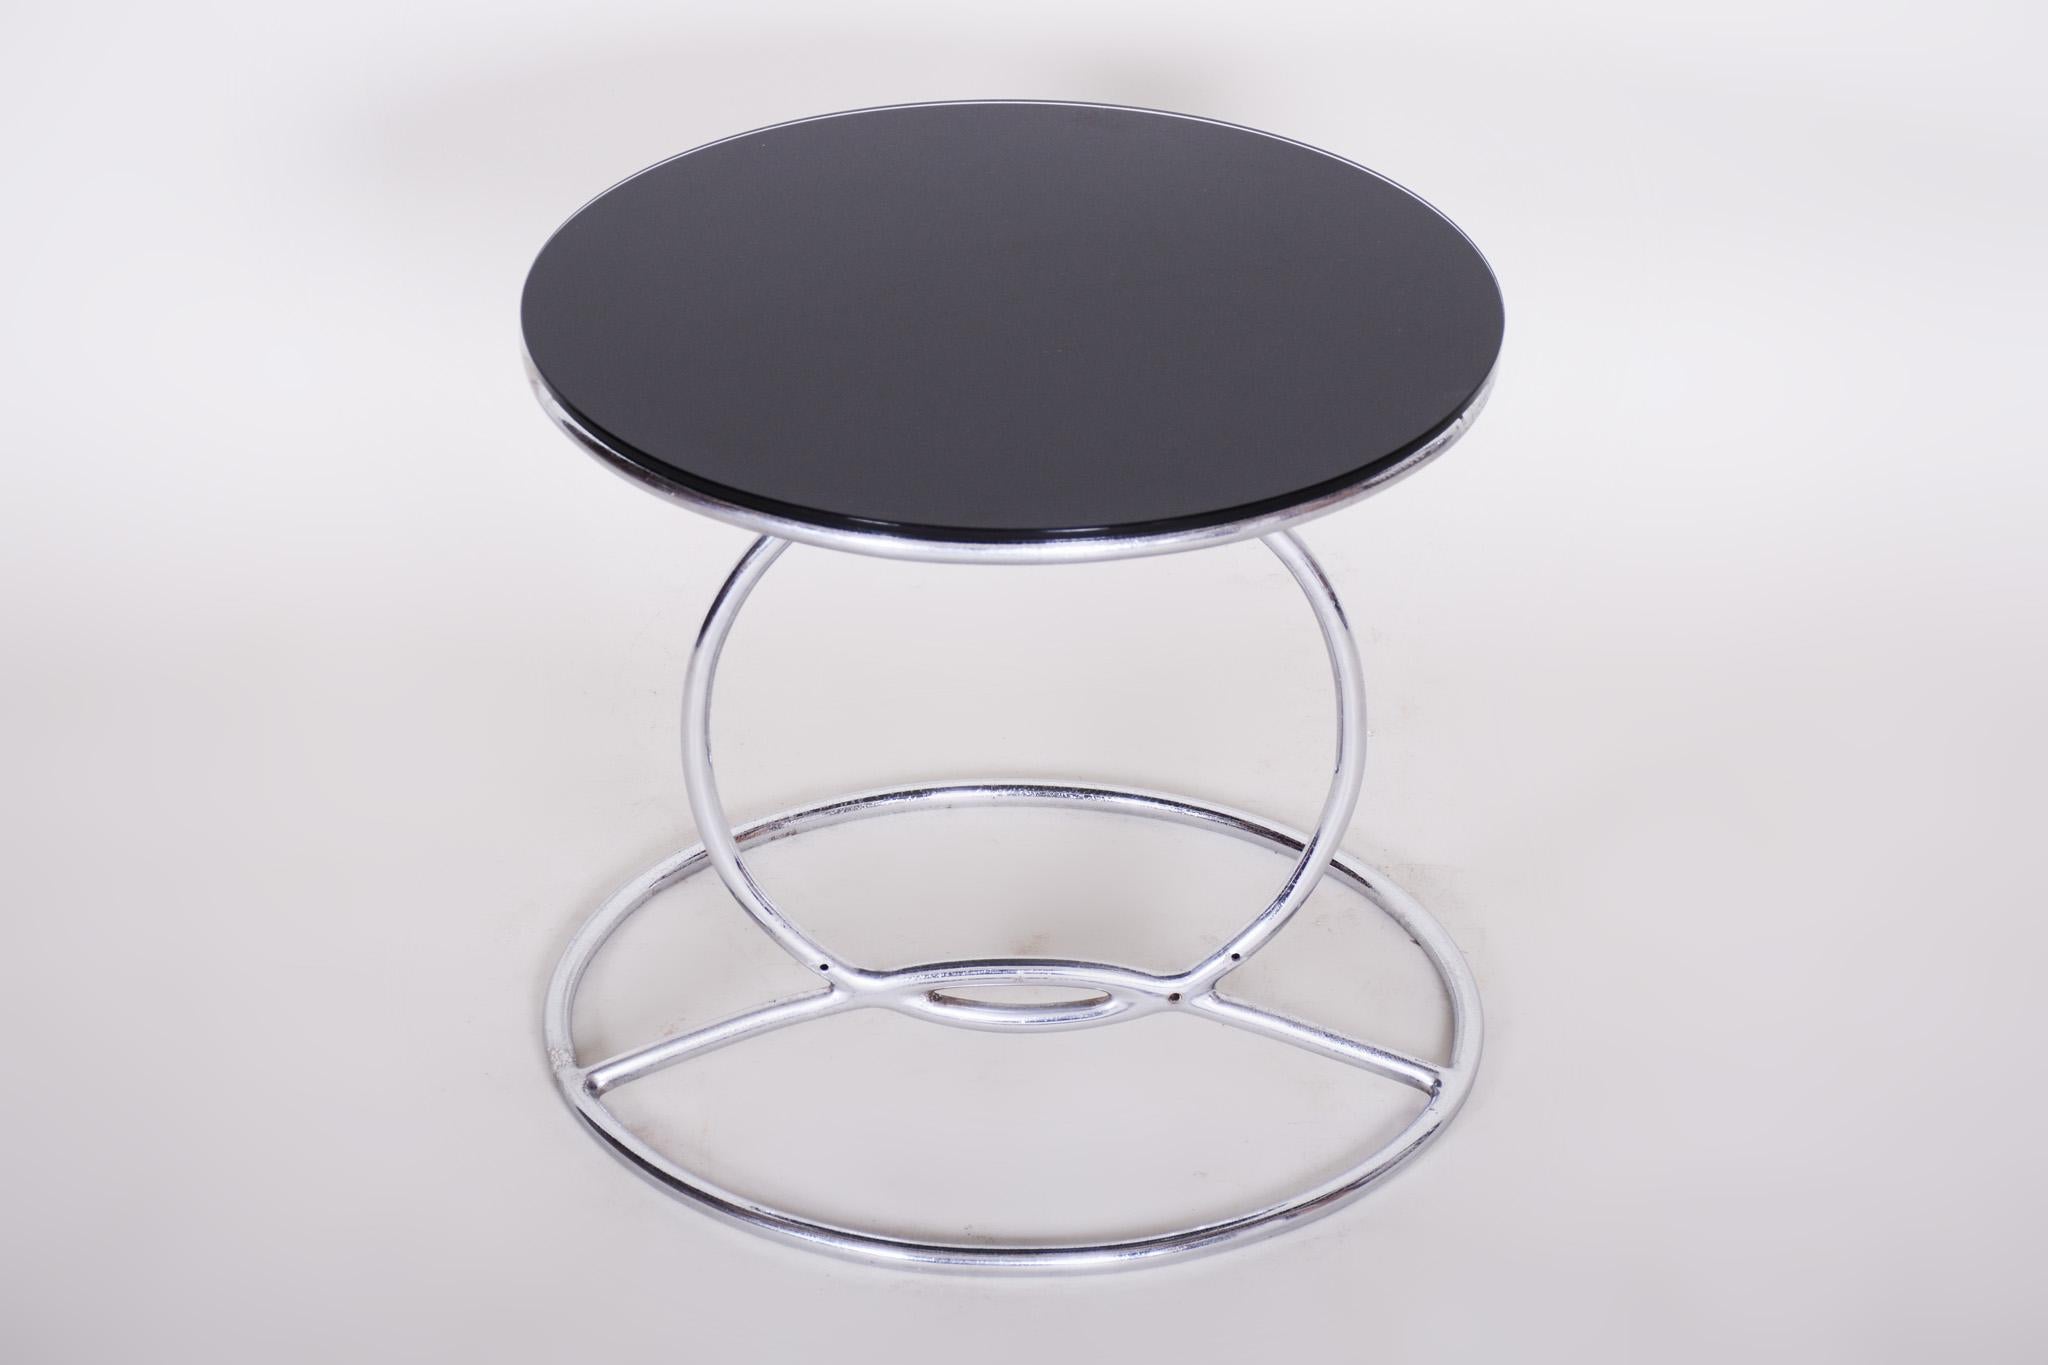 Unusual Chrome Bauhaus Round Small Table, 1950s, Perfect Condition, Black glass 1